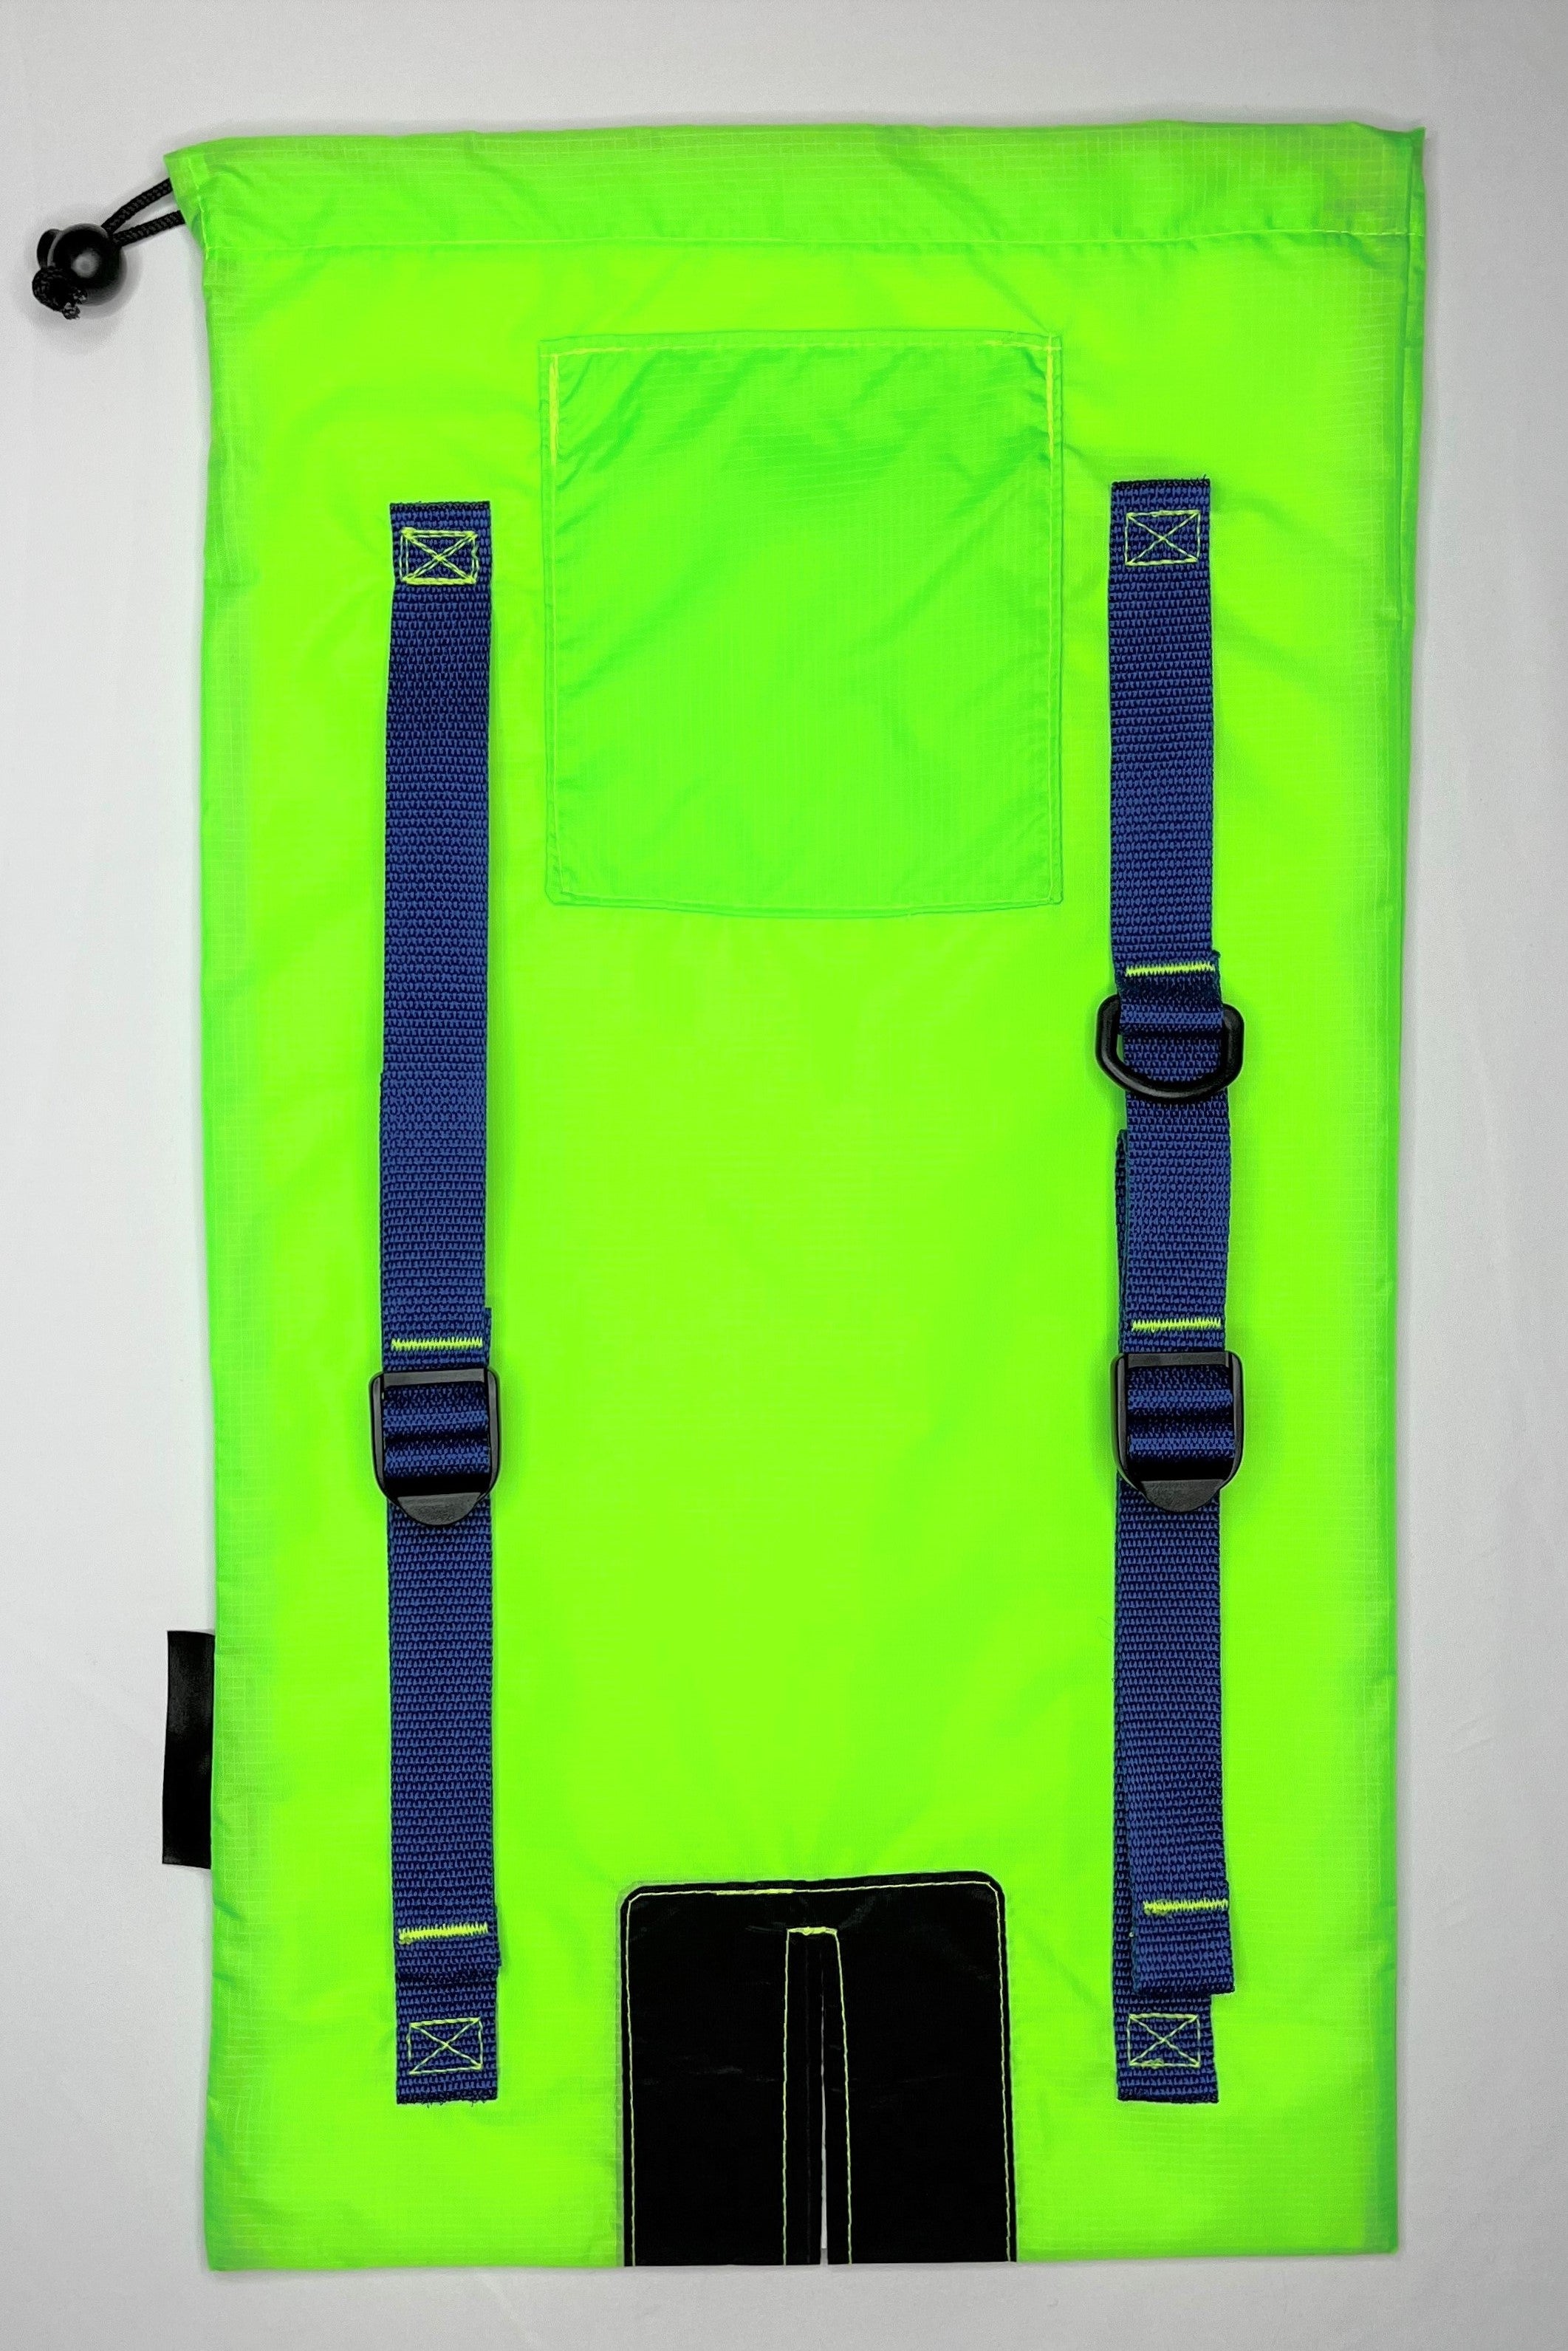 Image of green Ski Pack fabric with blue straps. Features adjuster straps and d-ring for carrying ski accessories.